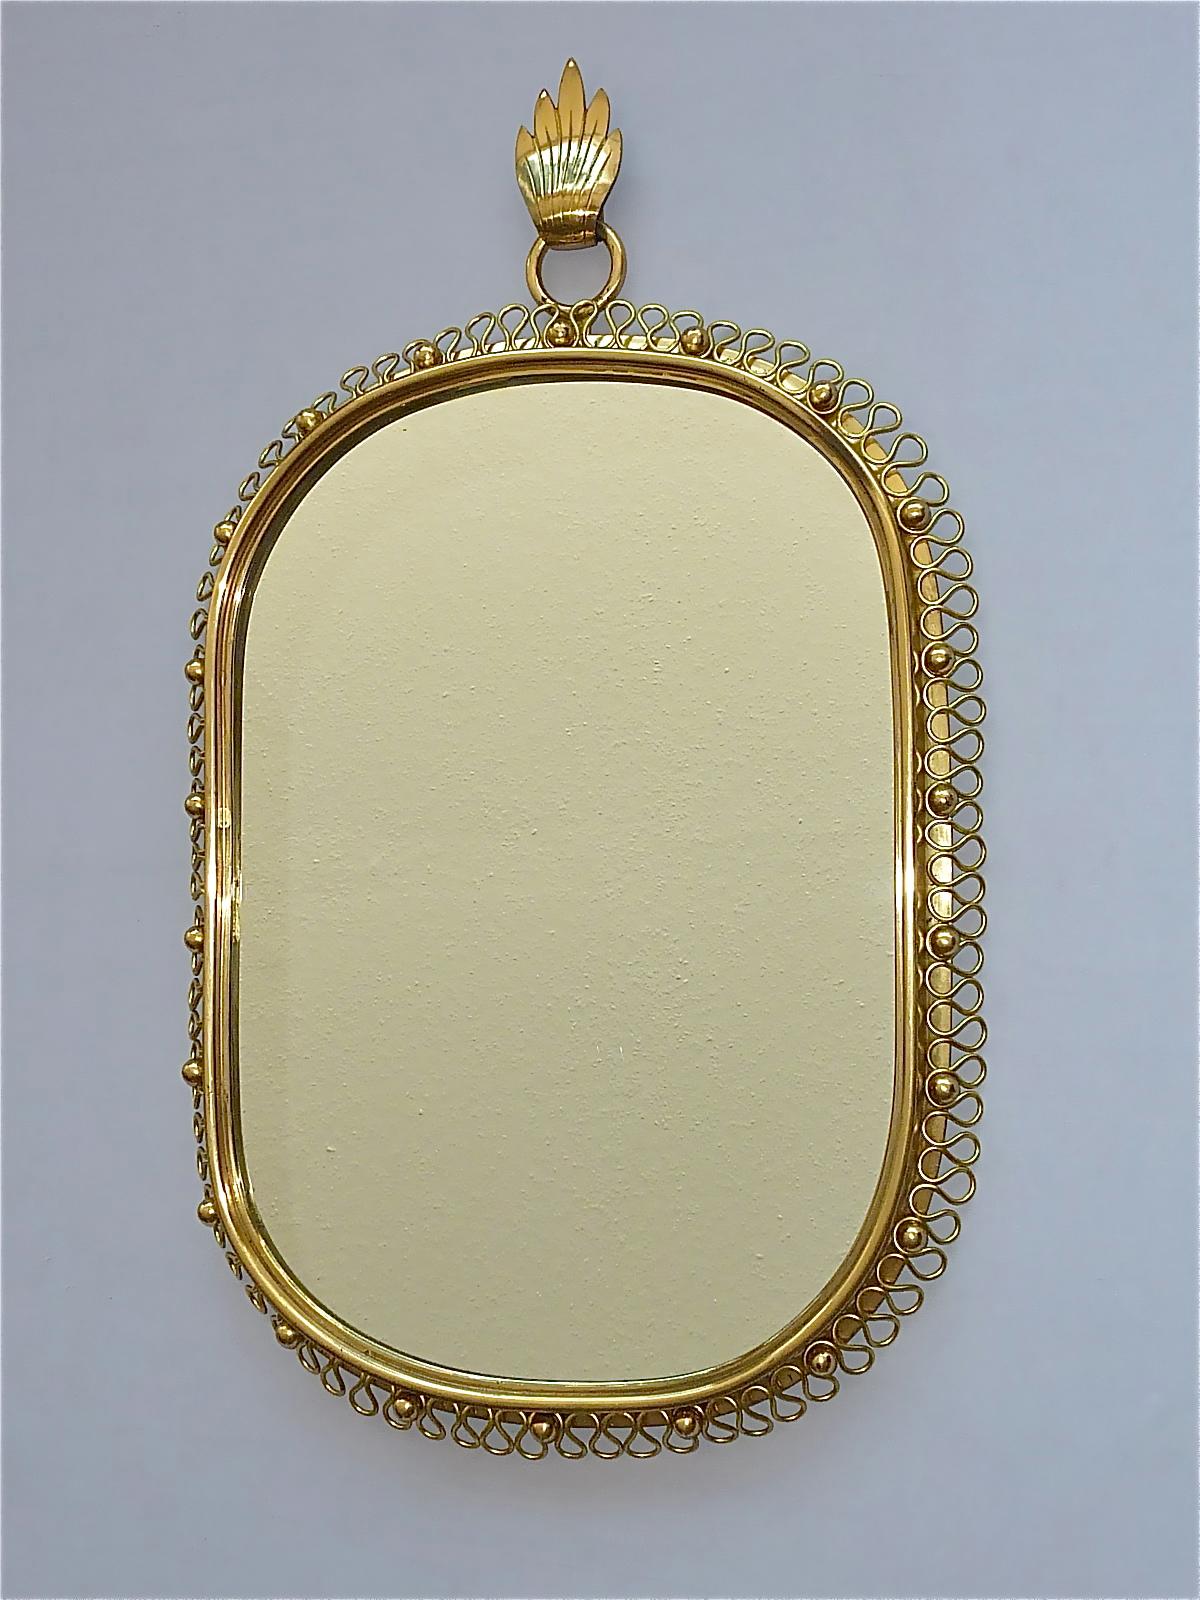 Sculptural mid-century wall mirror designed by Austrian Josef Frank and manufactured by Svenskt Tenn, Sweden in the 1950s. The mirror is made of patinated brass with an ondulation spiral loop frame with round solid brass screw nuts around. The